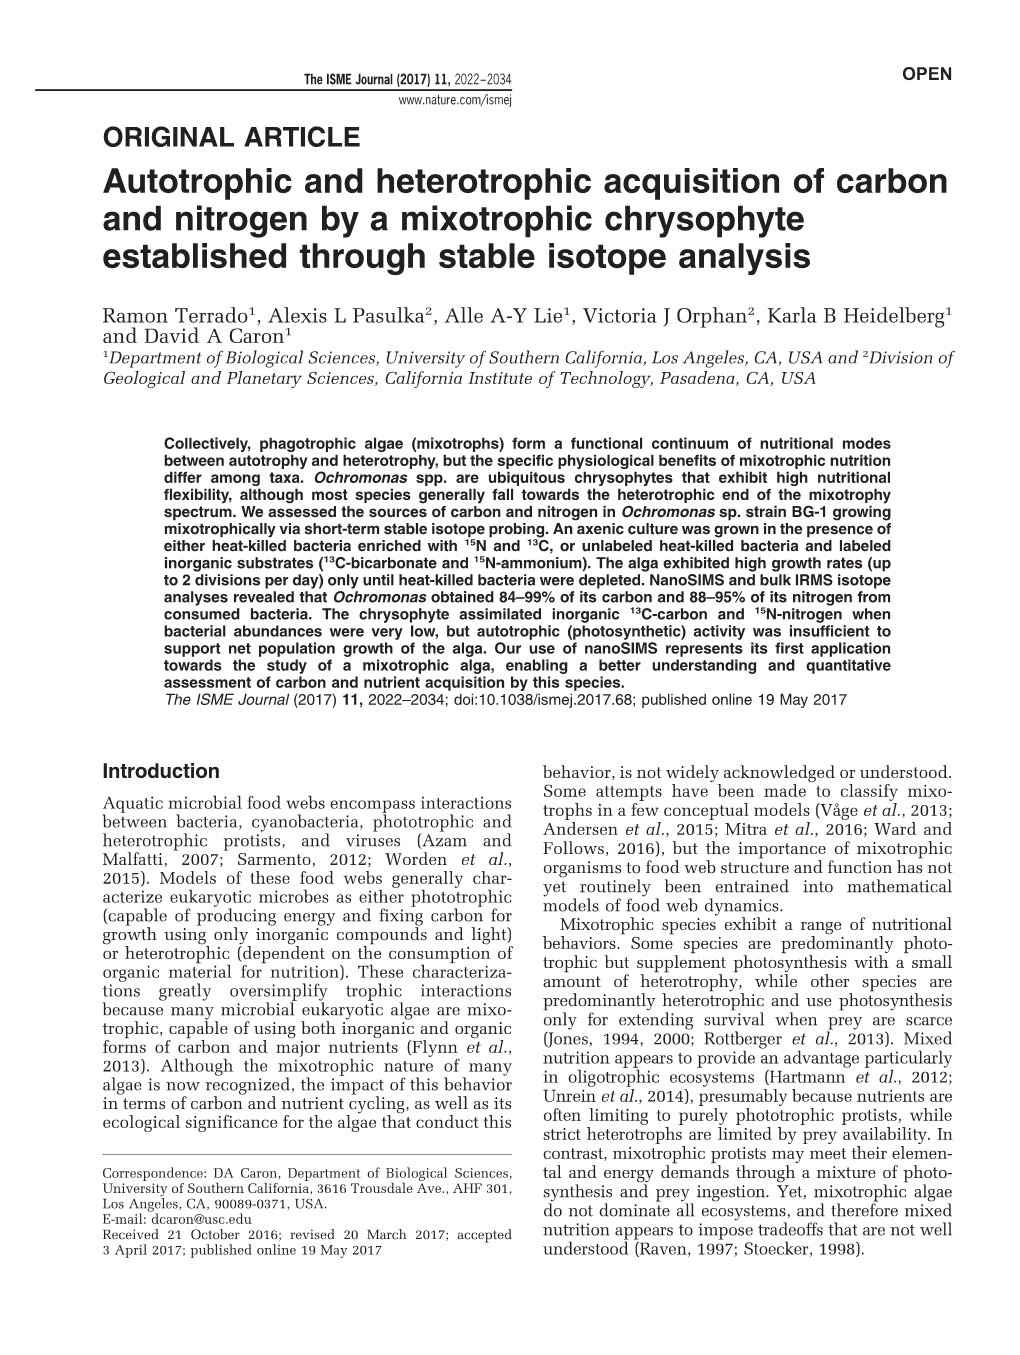 Autotrophic and Heterotrophic Acquisition of Carbon and Nitrogen by a Mixotrophic Chrysophyte Established Through Stable Isotope Analysis